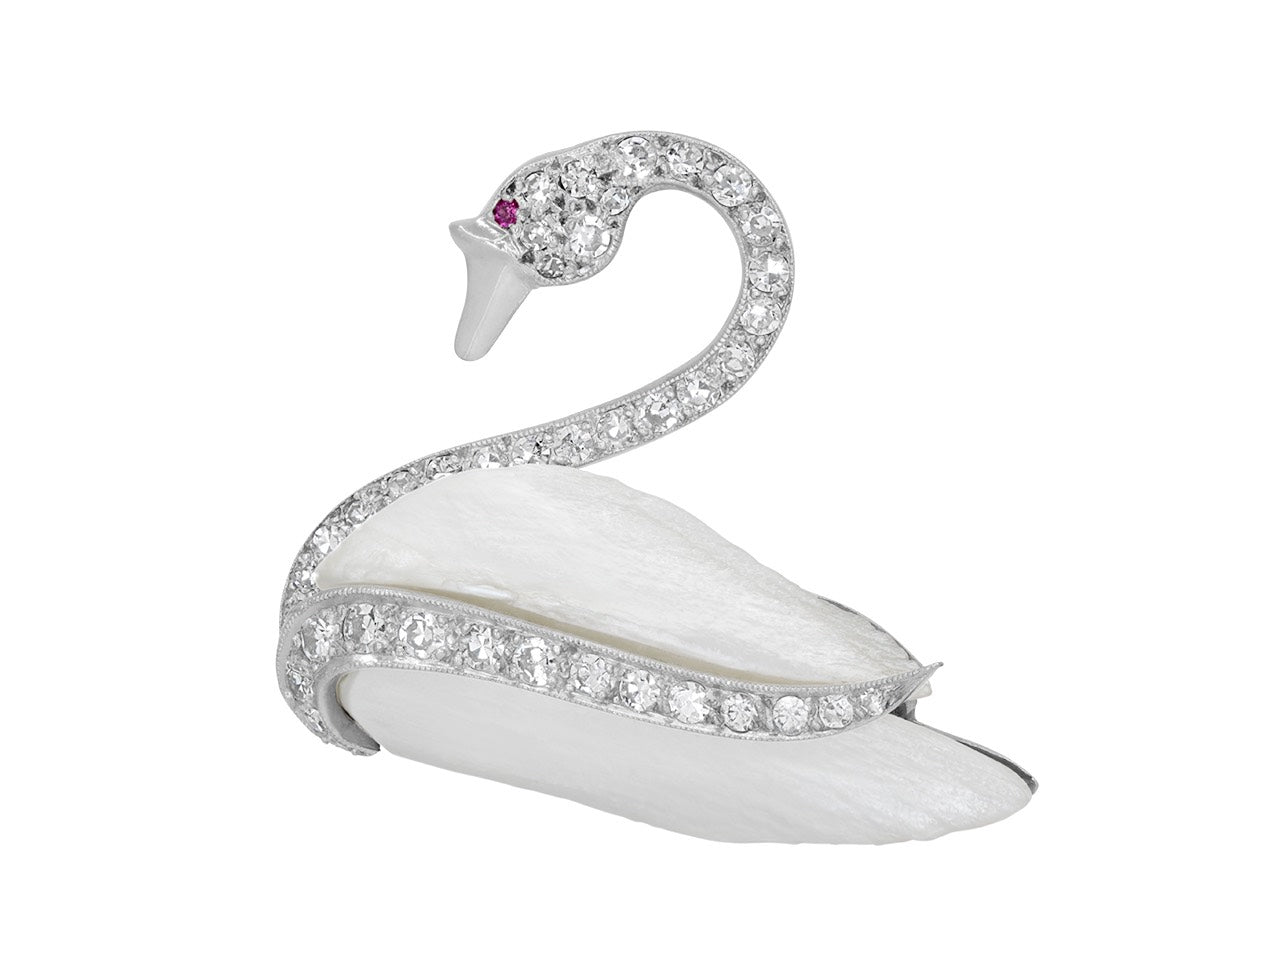 Freshwater Pearl and Diamond Swan Brooch in 14K White Gold